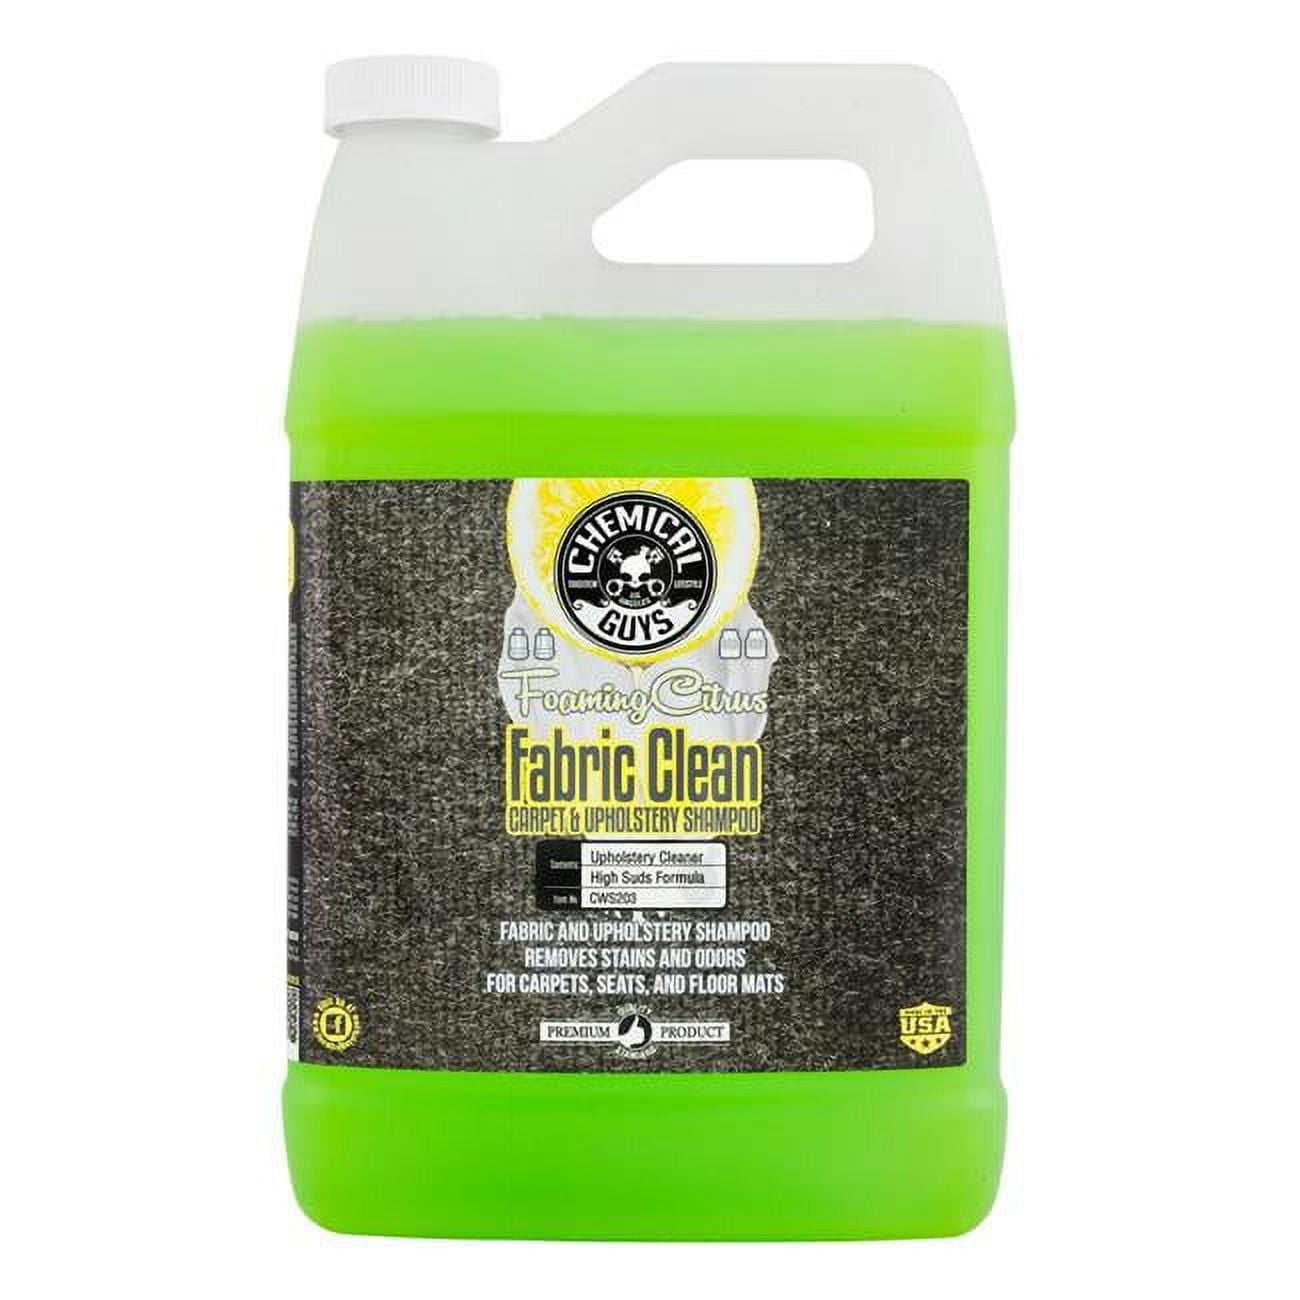 Chemical Guys Foaming Citrus Fabric Clean Carpet/Upholstery Shampoo 